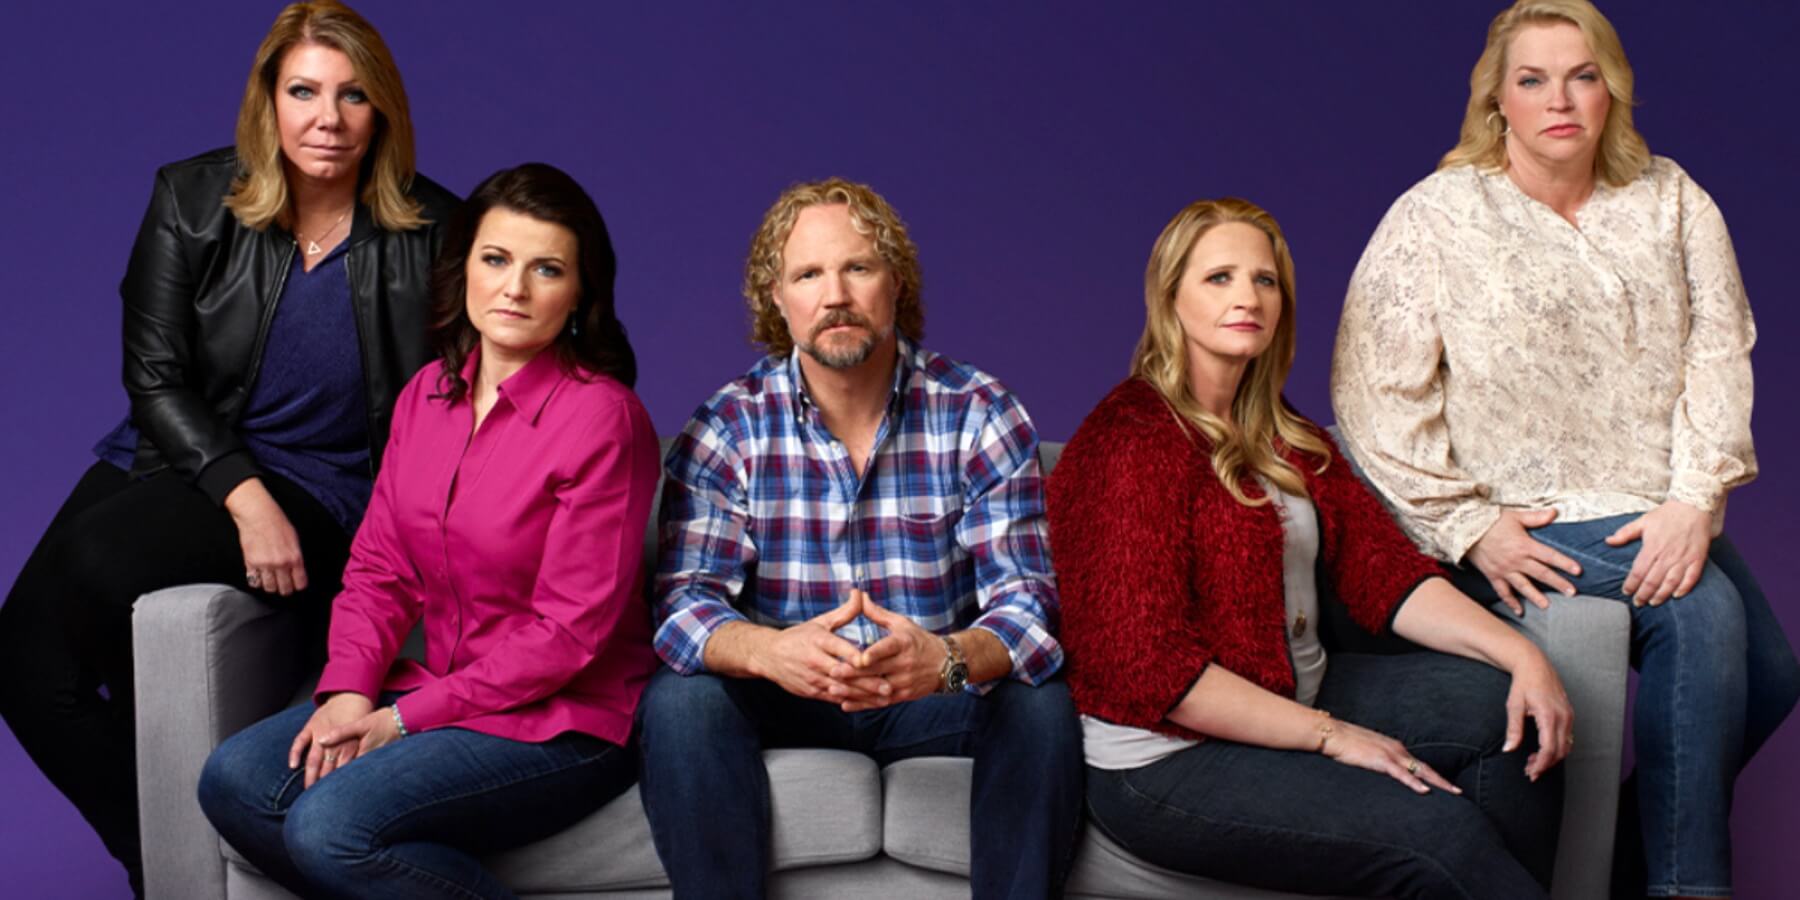 ‘Sister Wives’ Unwatchable: TLC Series No Longer Serves Its Original Premise, so Why Is It Still On?